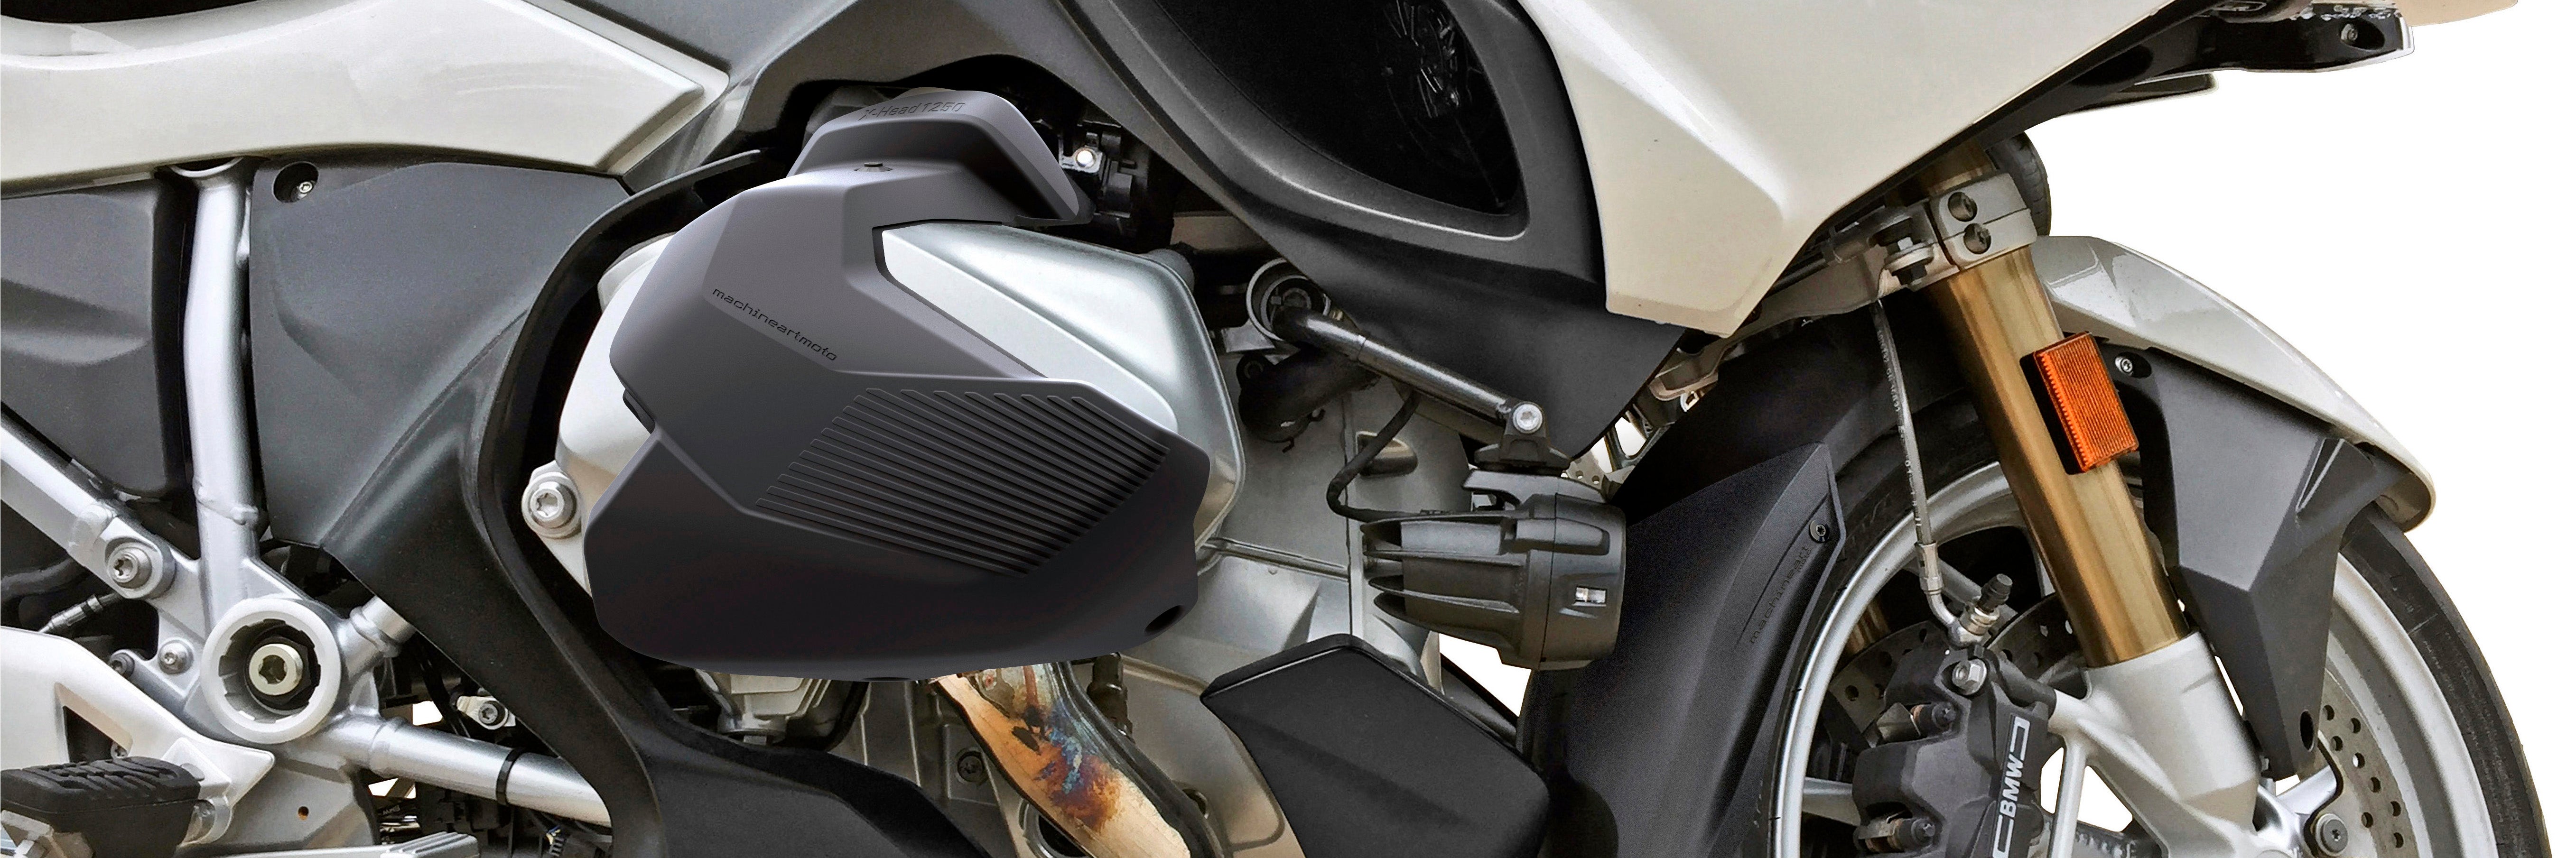 Protection Products for BMW & Adventure Touring Motorcycles